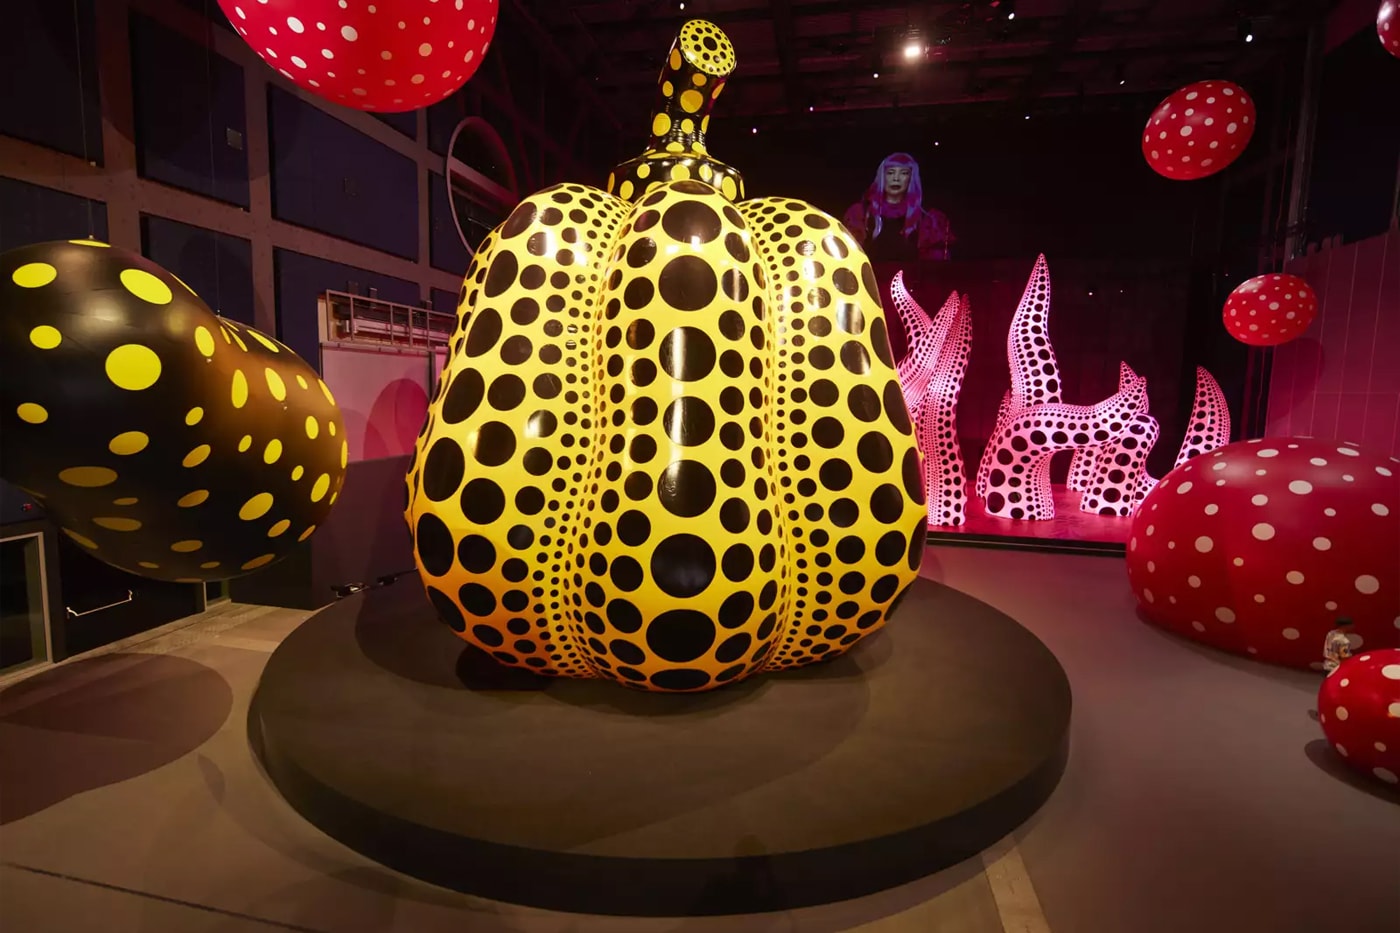 Yayoi Kusama's Inflatable Works Land in Manchester's 'You, Me and the Balloons' Exhibition louis vuitton united kingdom tate modern polka dots pumpkin